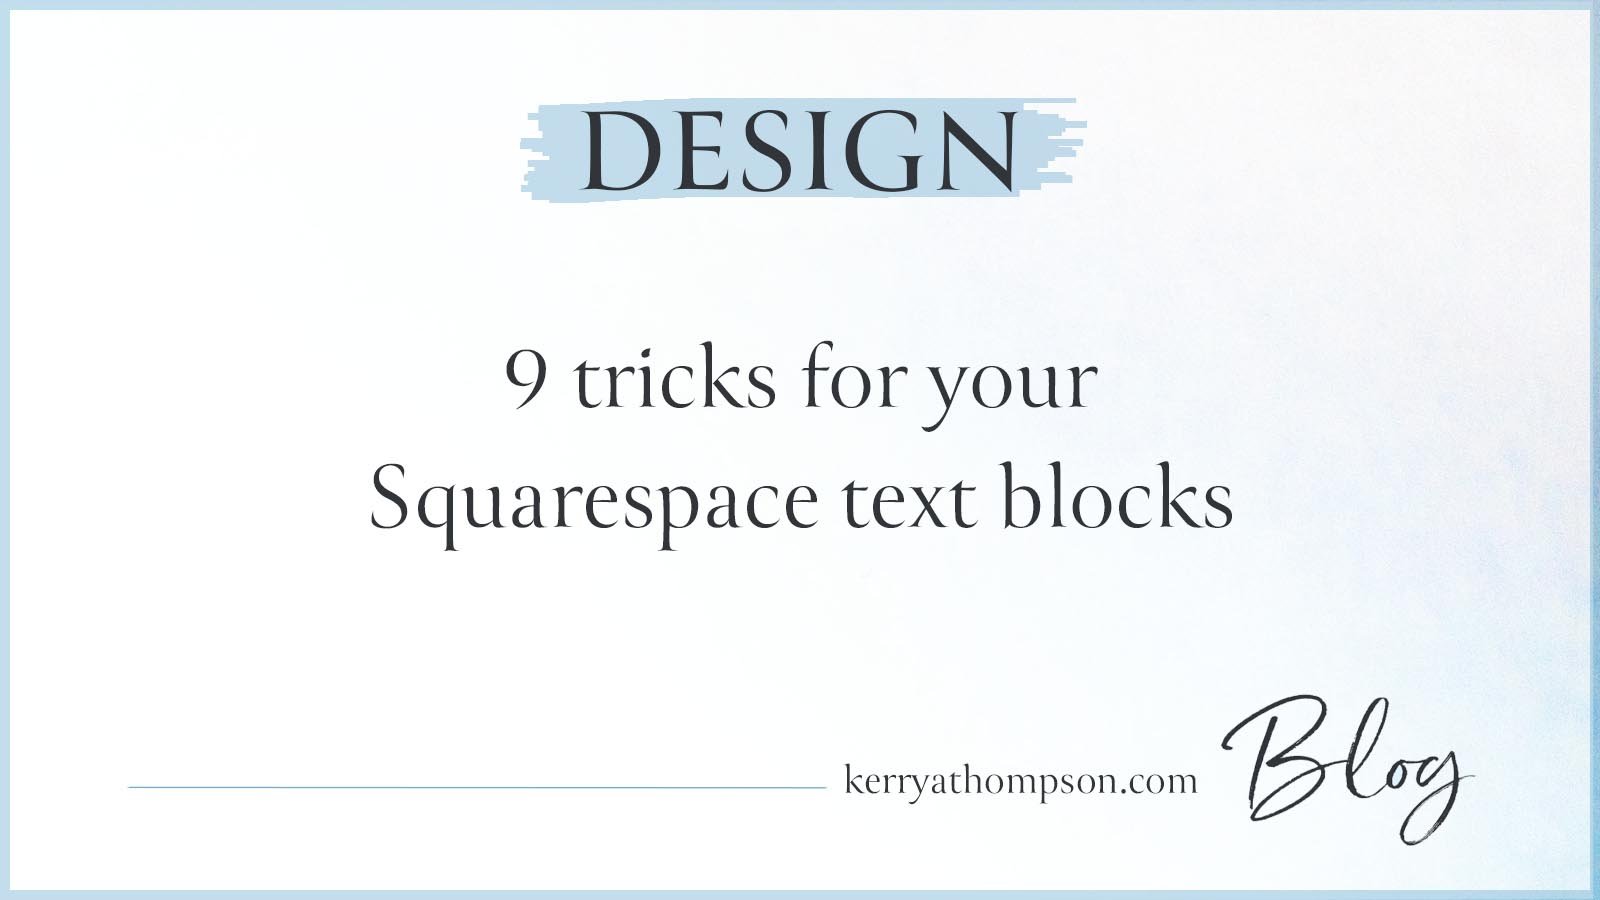 Lys Forsvinde Sovereign 9 tricks for your Squarespace text blocks — Kerry A. Thompson Website Design